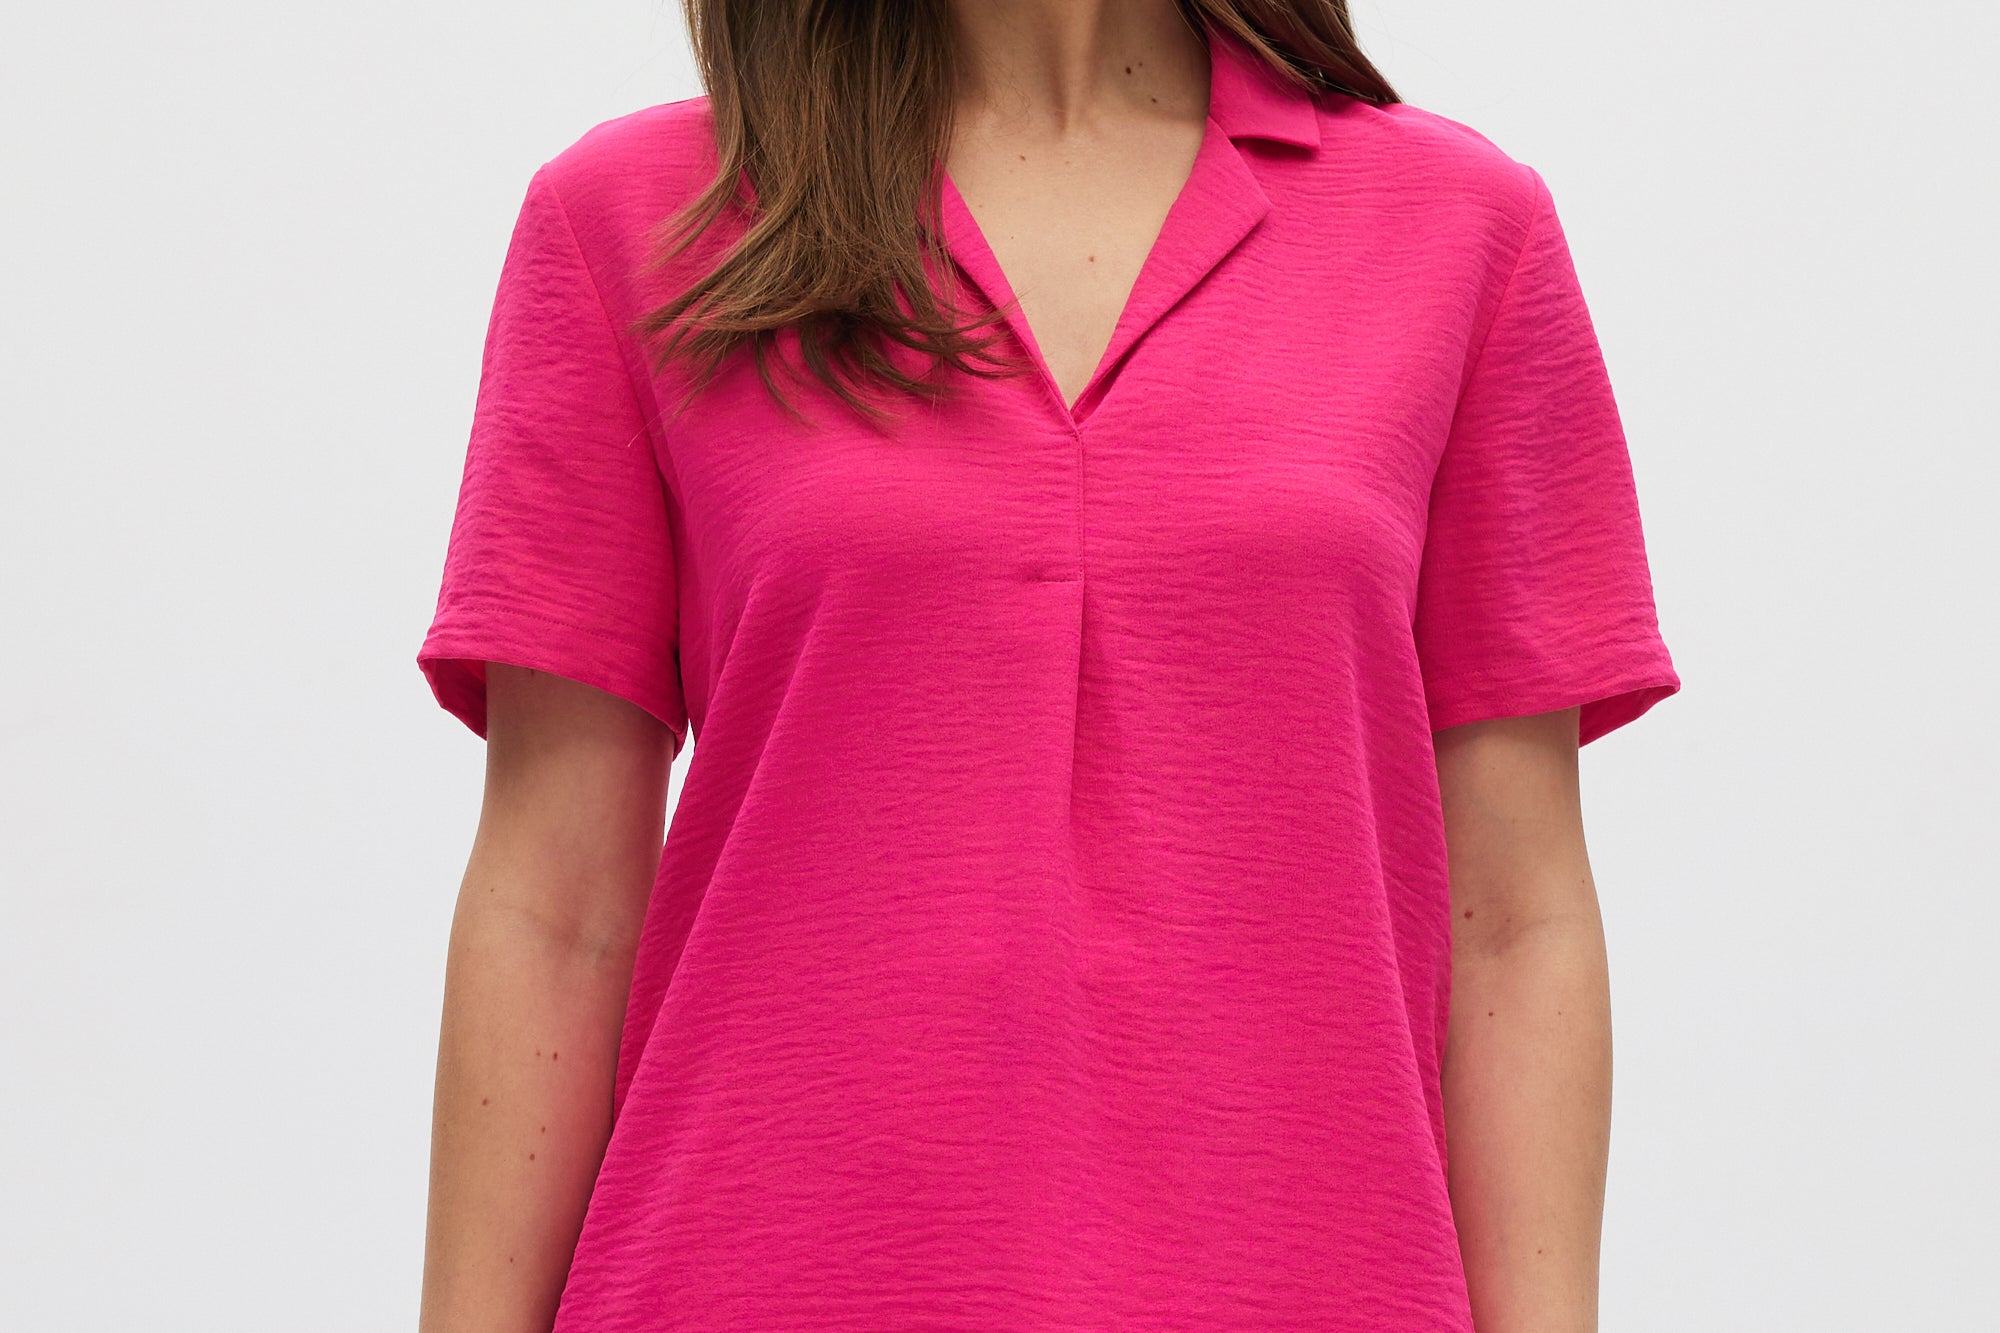 Pink Classic Notch Airflow Shirt front